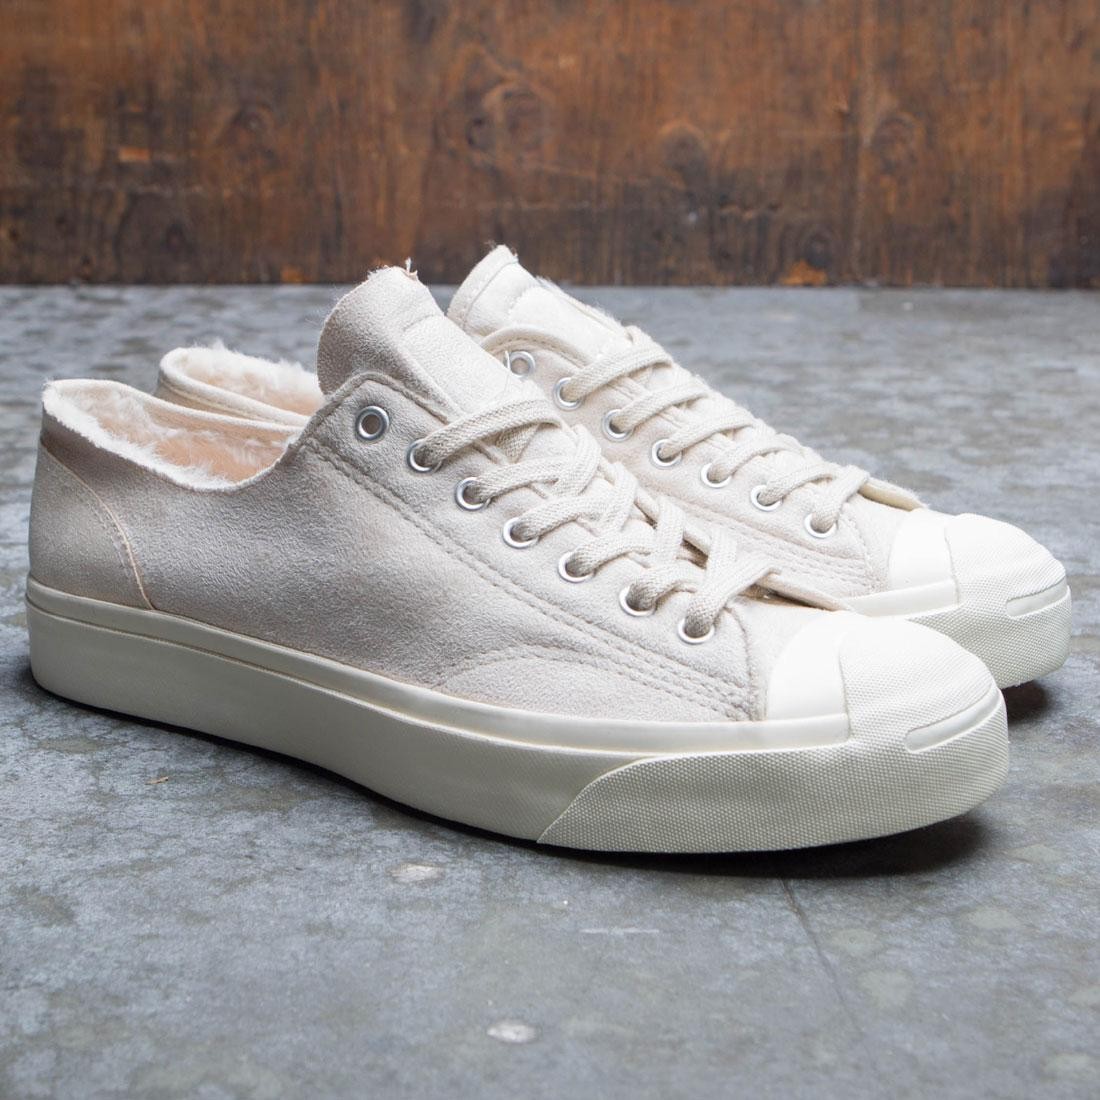 x men jack purcell ox white swan